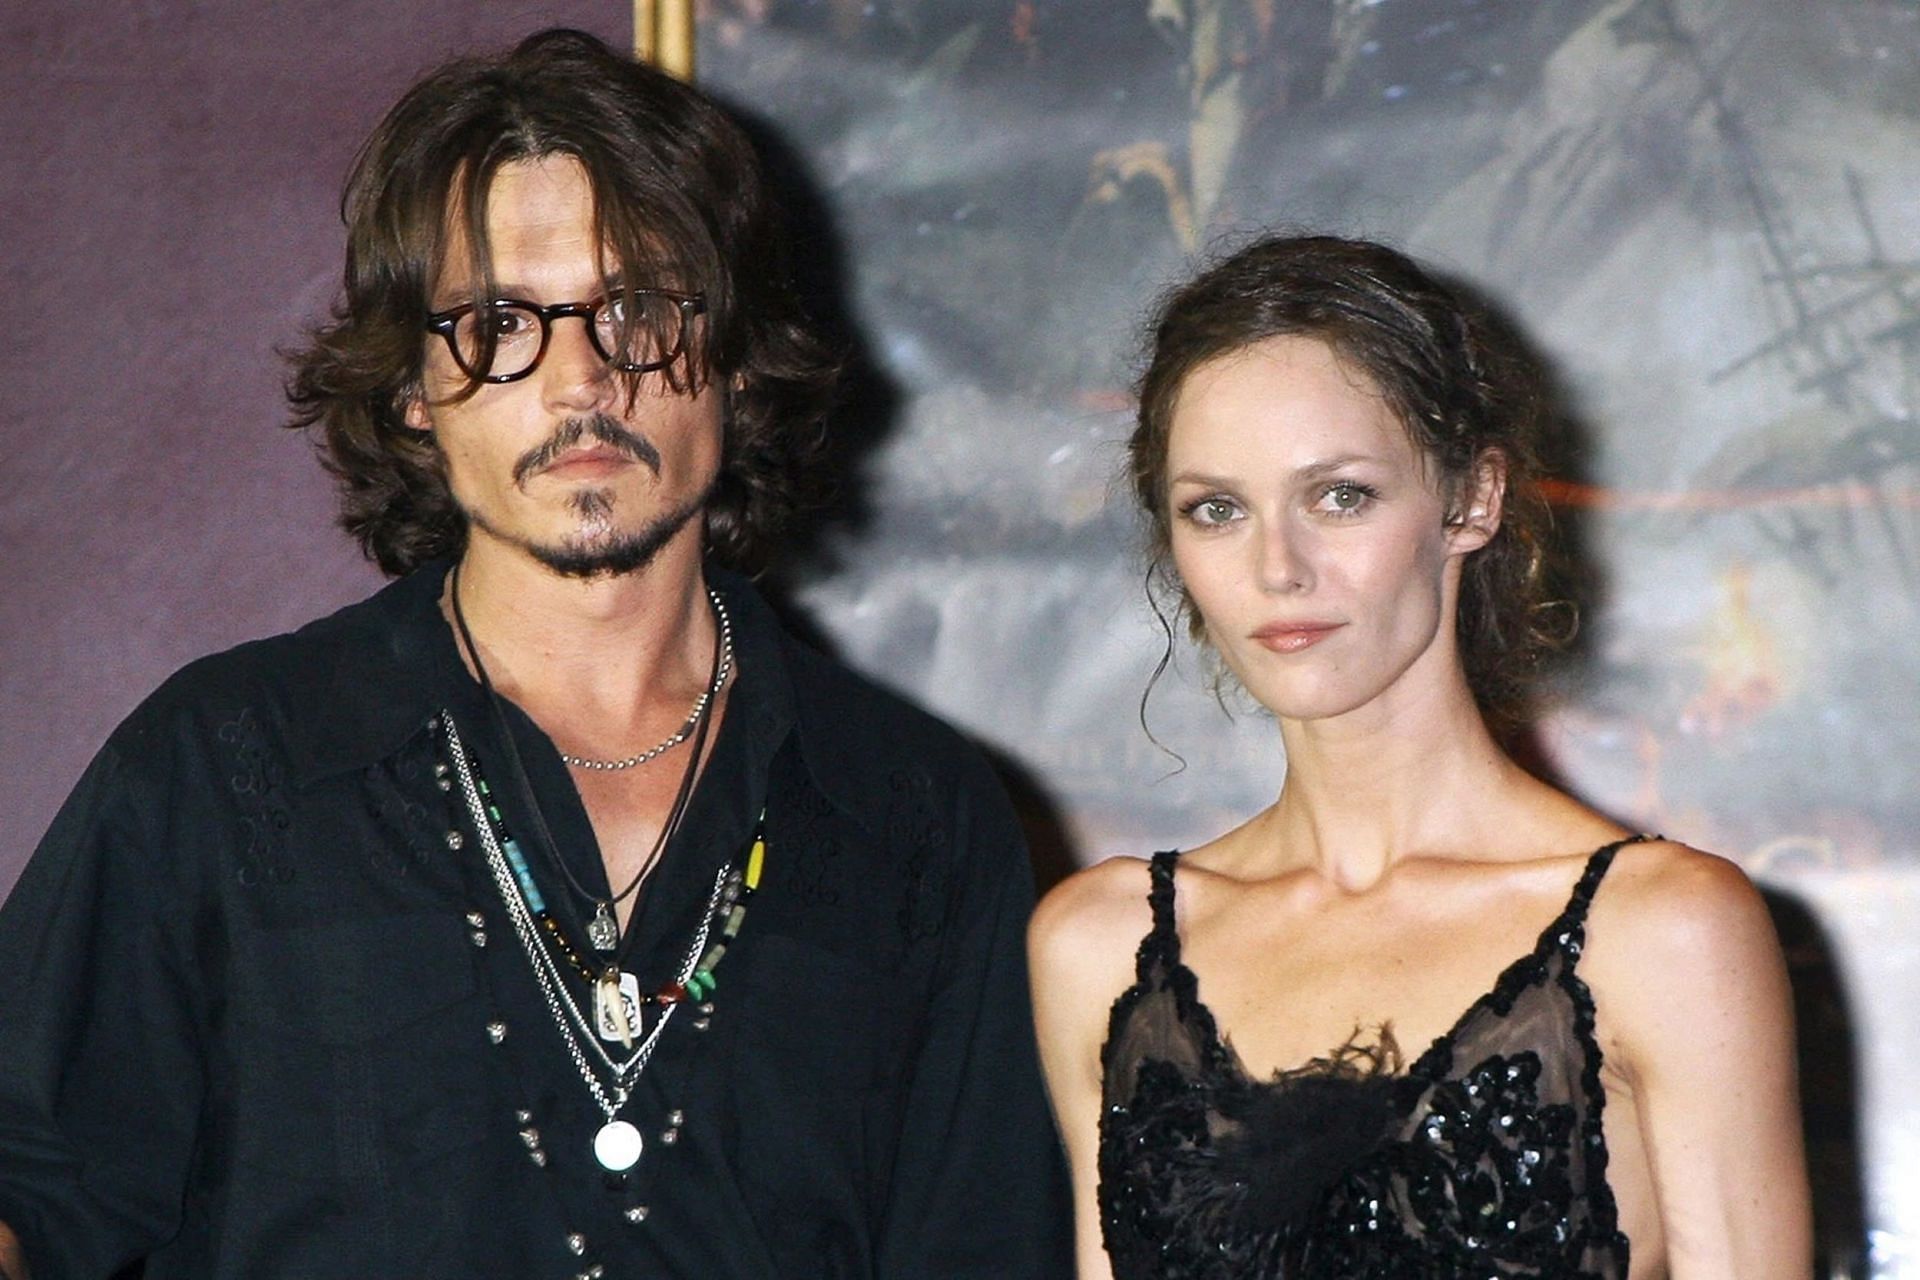 Johnny Depp and Vanessa Paradis (Image via Frederic Souloy/Gamma-Rapho/Getty Images)